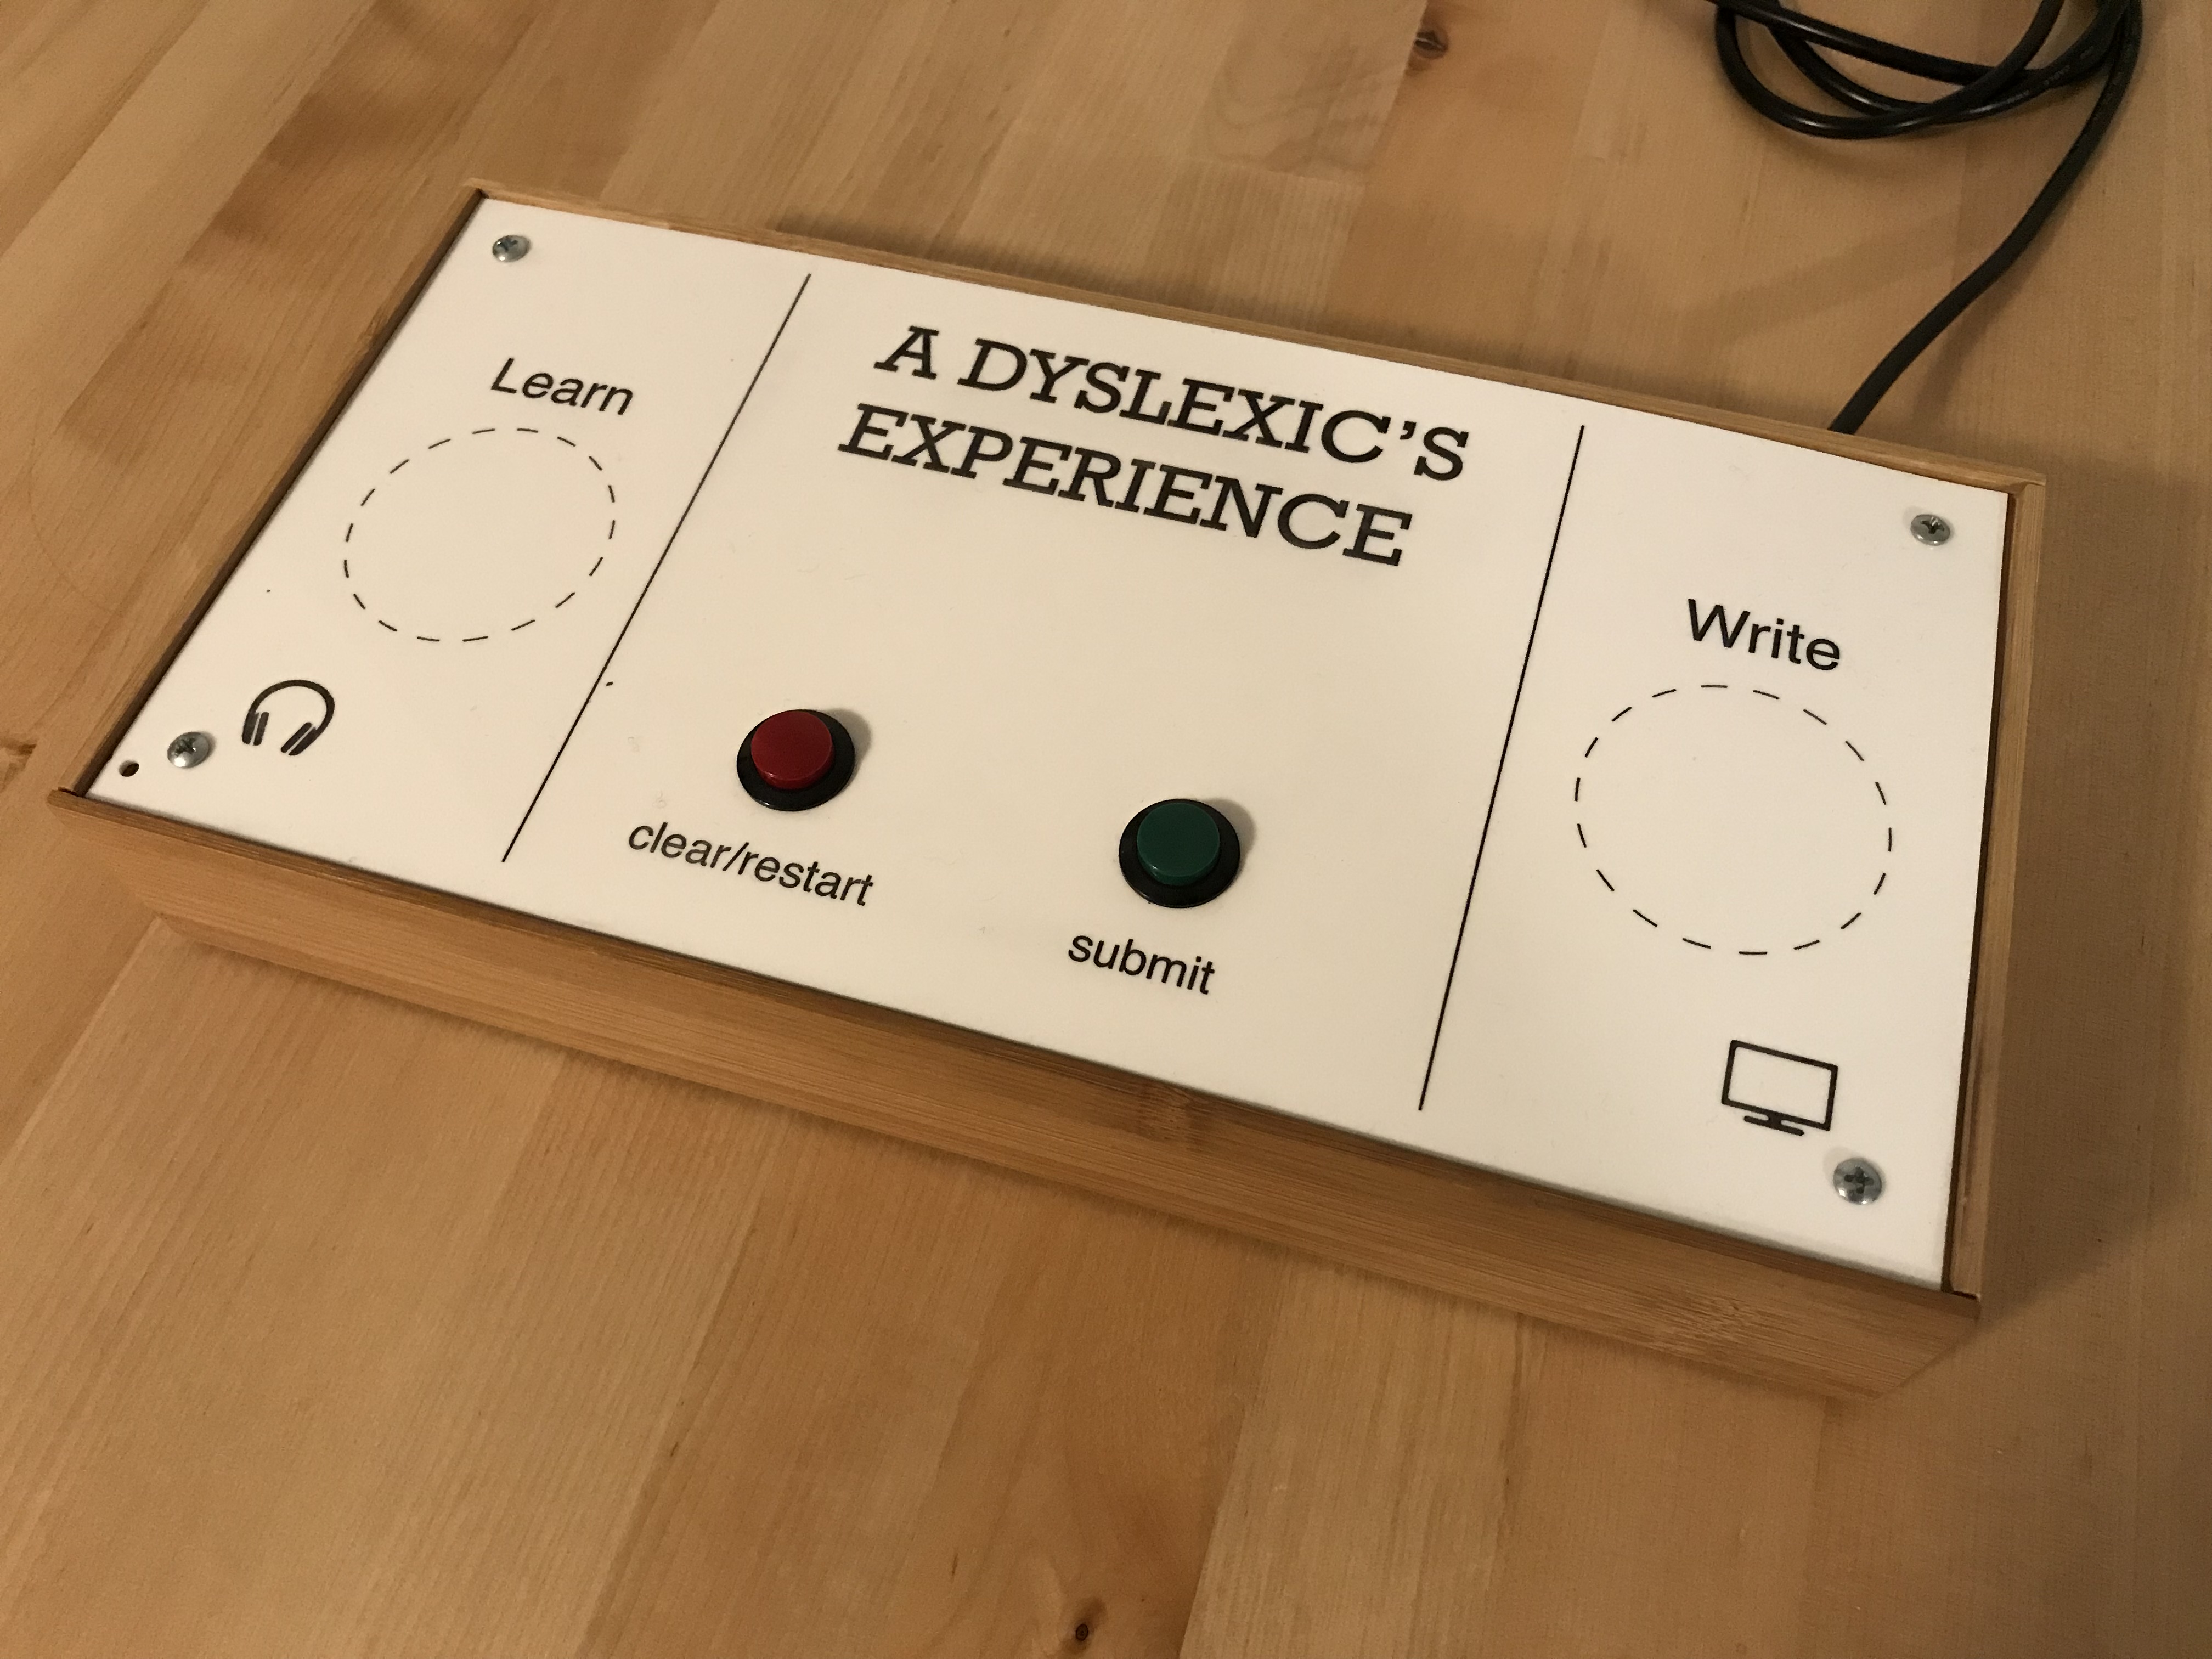 A Dyslexic’s Experience is designed for users to face the challenges that individuals with language based learning disabilities encounter, by learning and writing with a new visual representation of the alphabet.